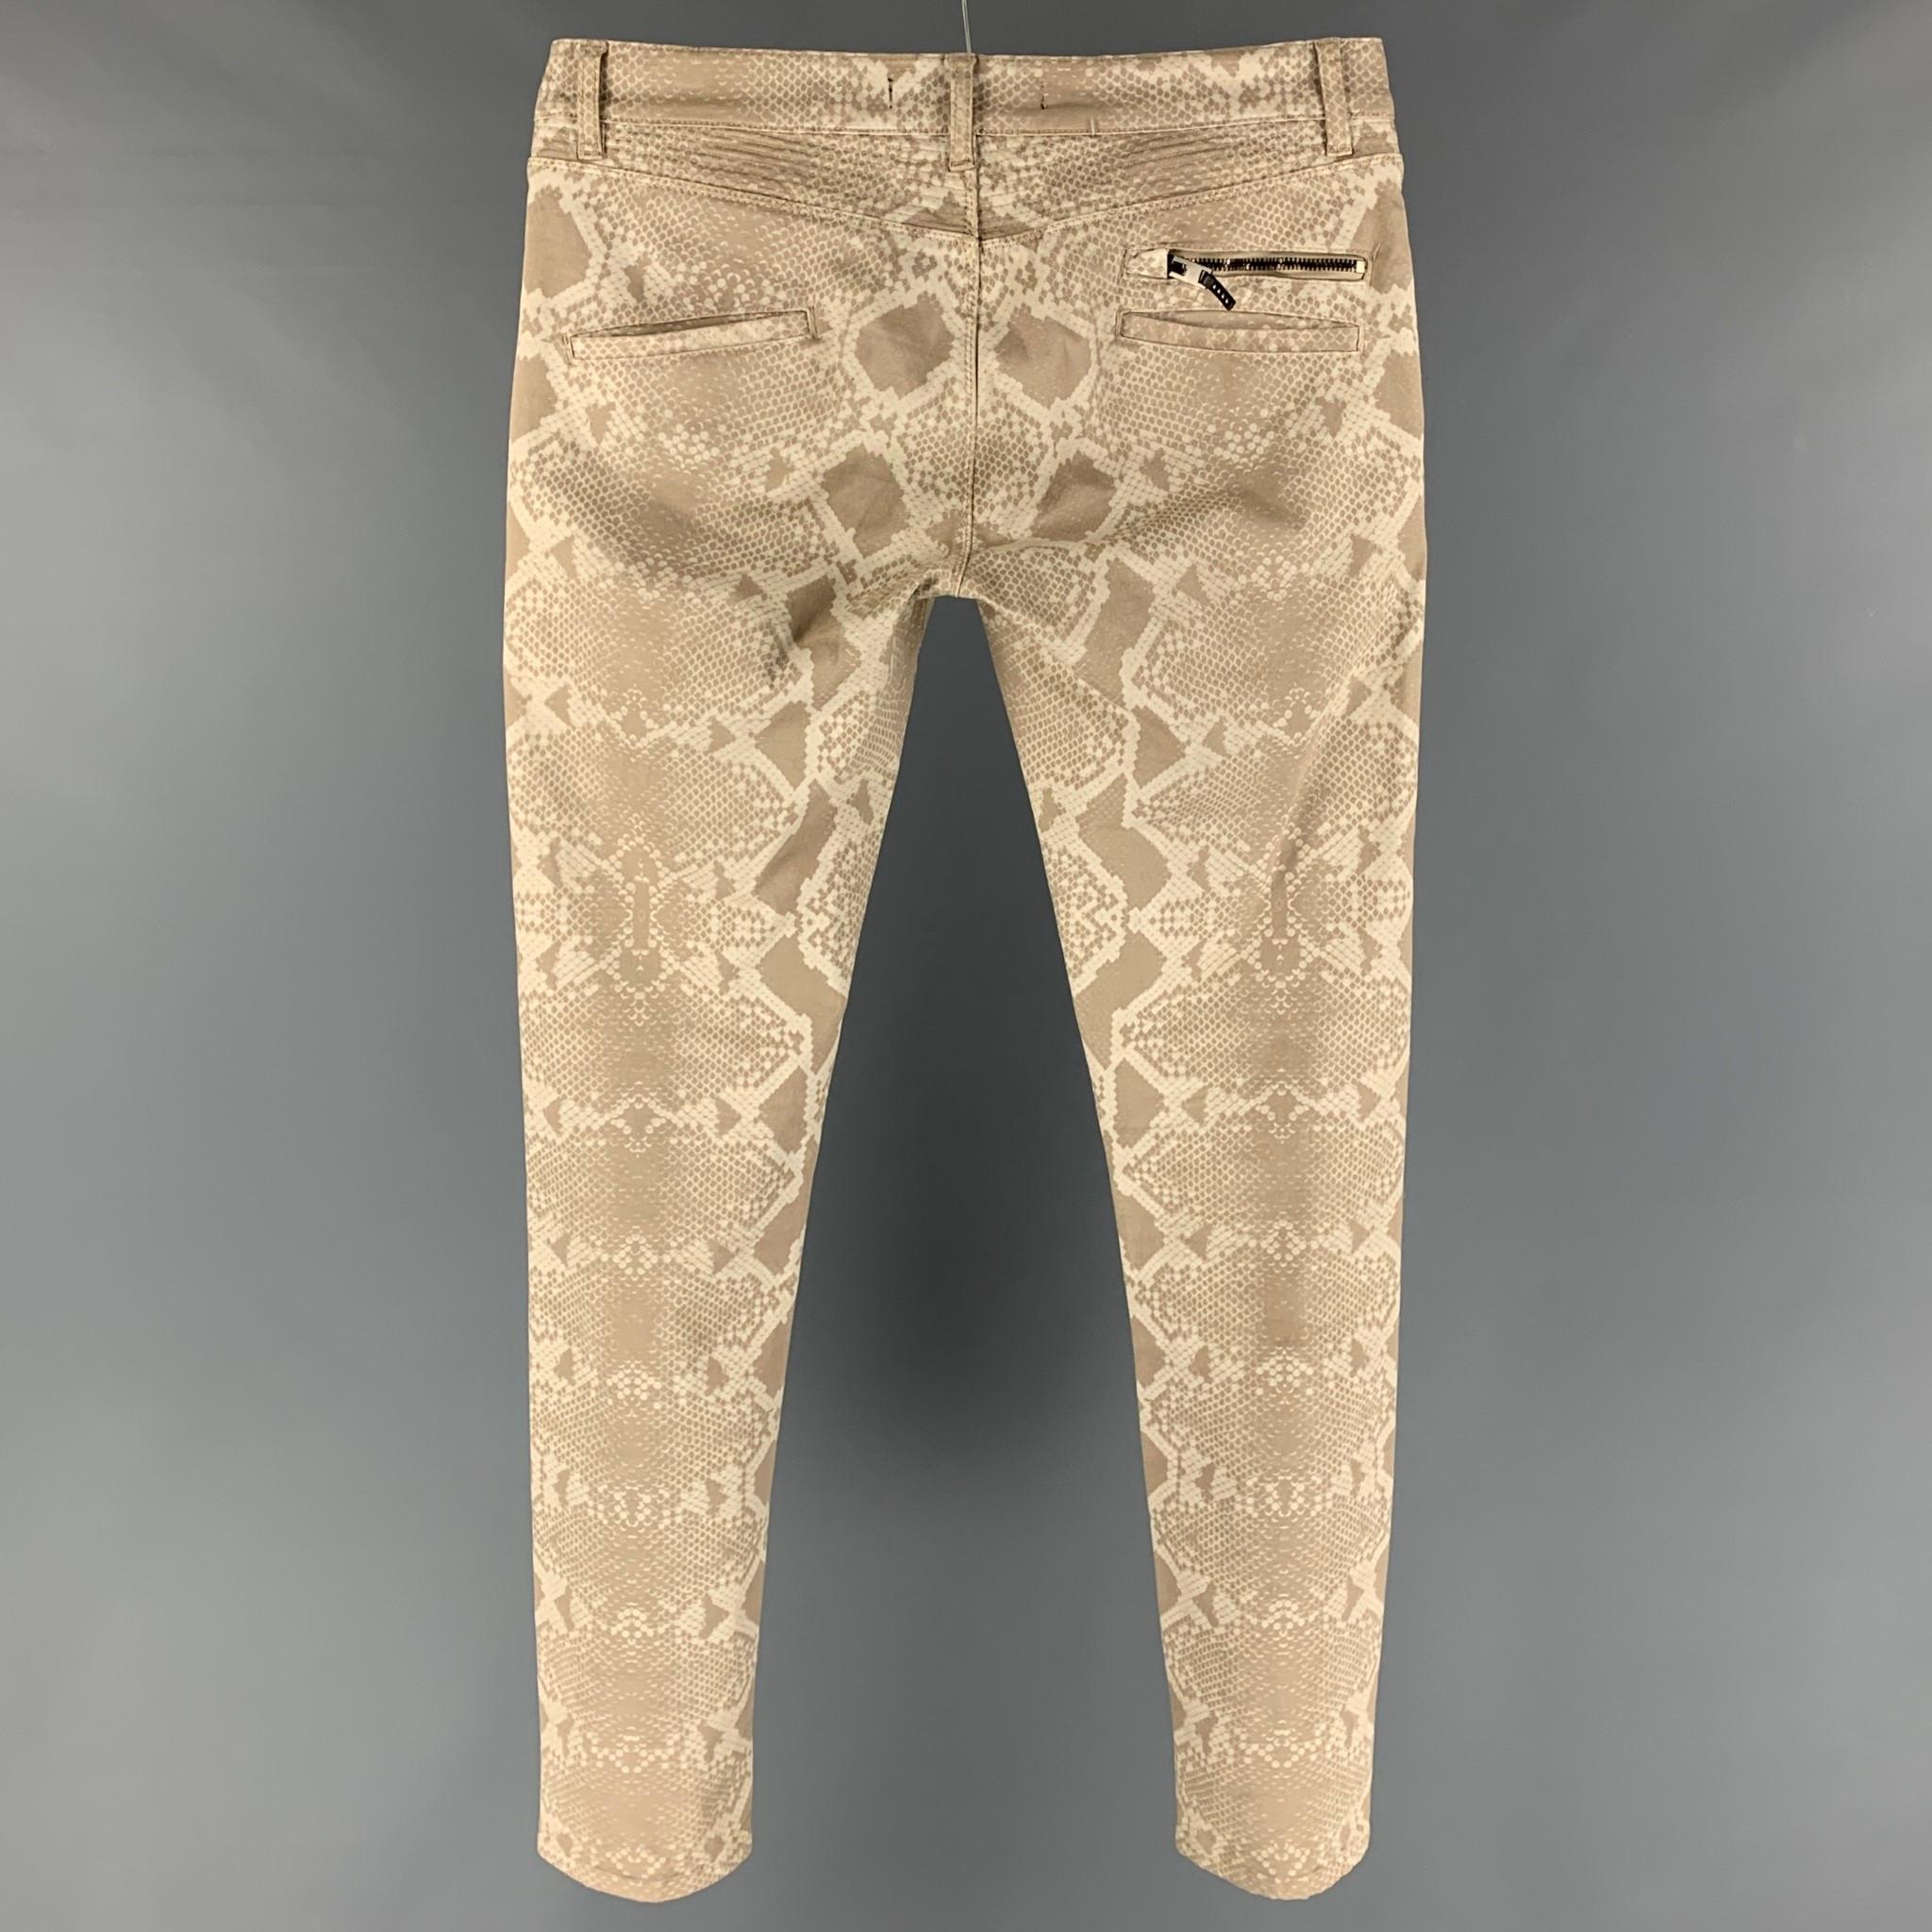 ROBERTO CAVALLI jeans comes in a beige snake skin cotton featuring a skinny fit, button fly, and a slide button closure. Made in Italy. 

Very Good Pre-Owned Condition. Light discoloration at front.
Marked: 31

Measurements:

Waist: 32 in.
Rise: 9